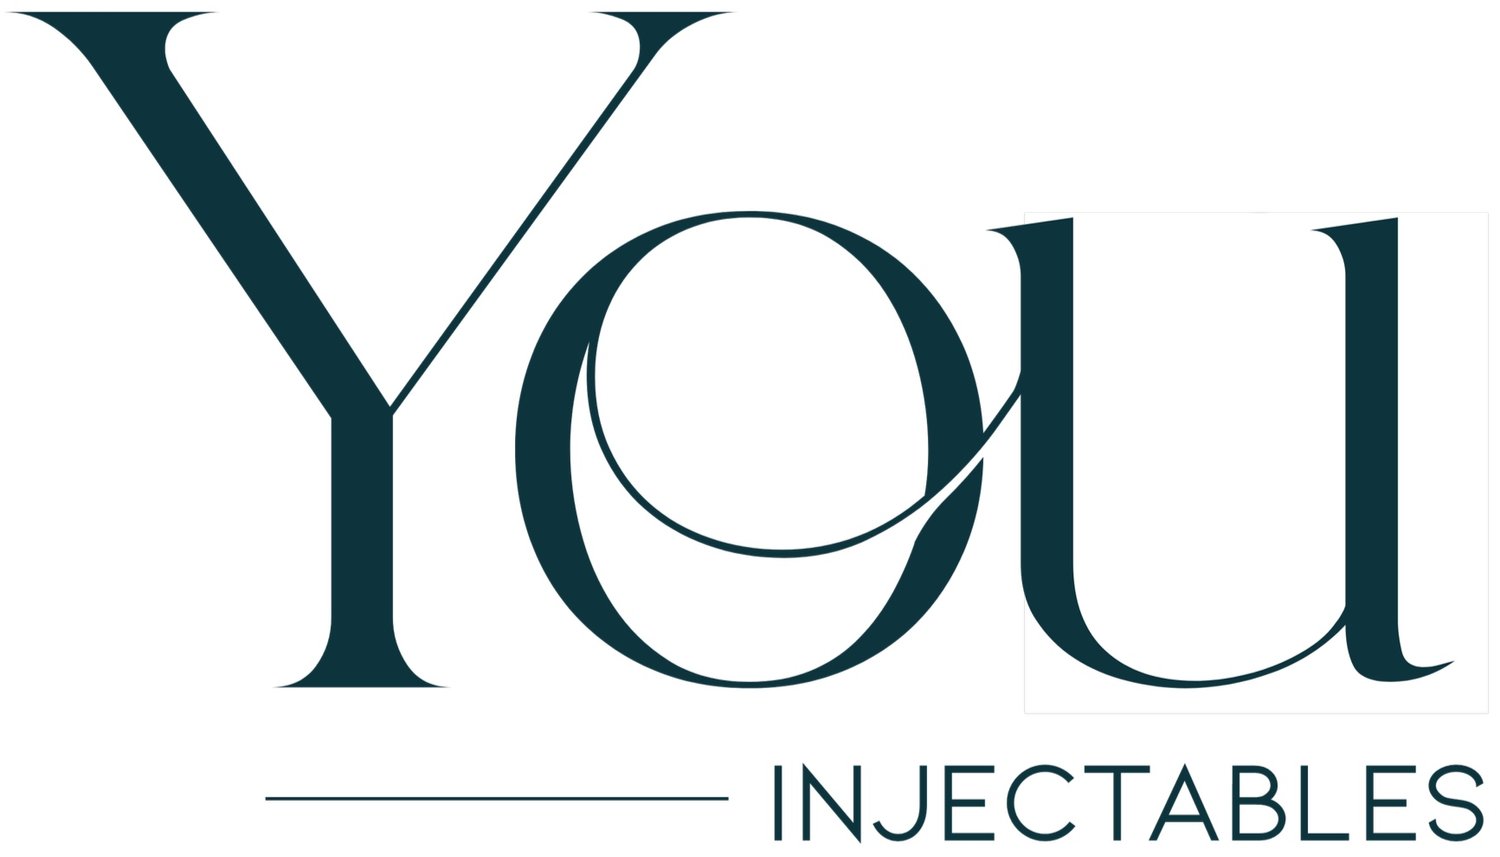 YOU Injectables